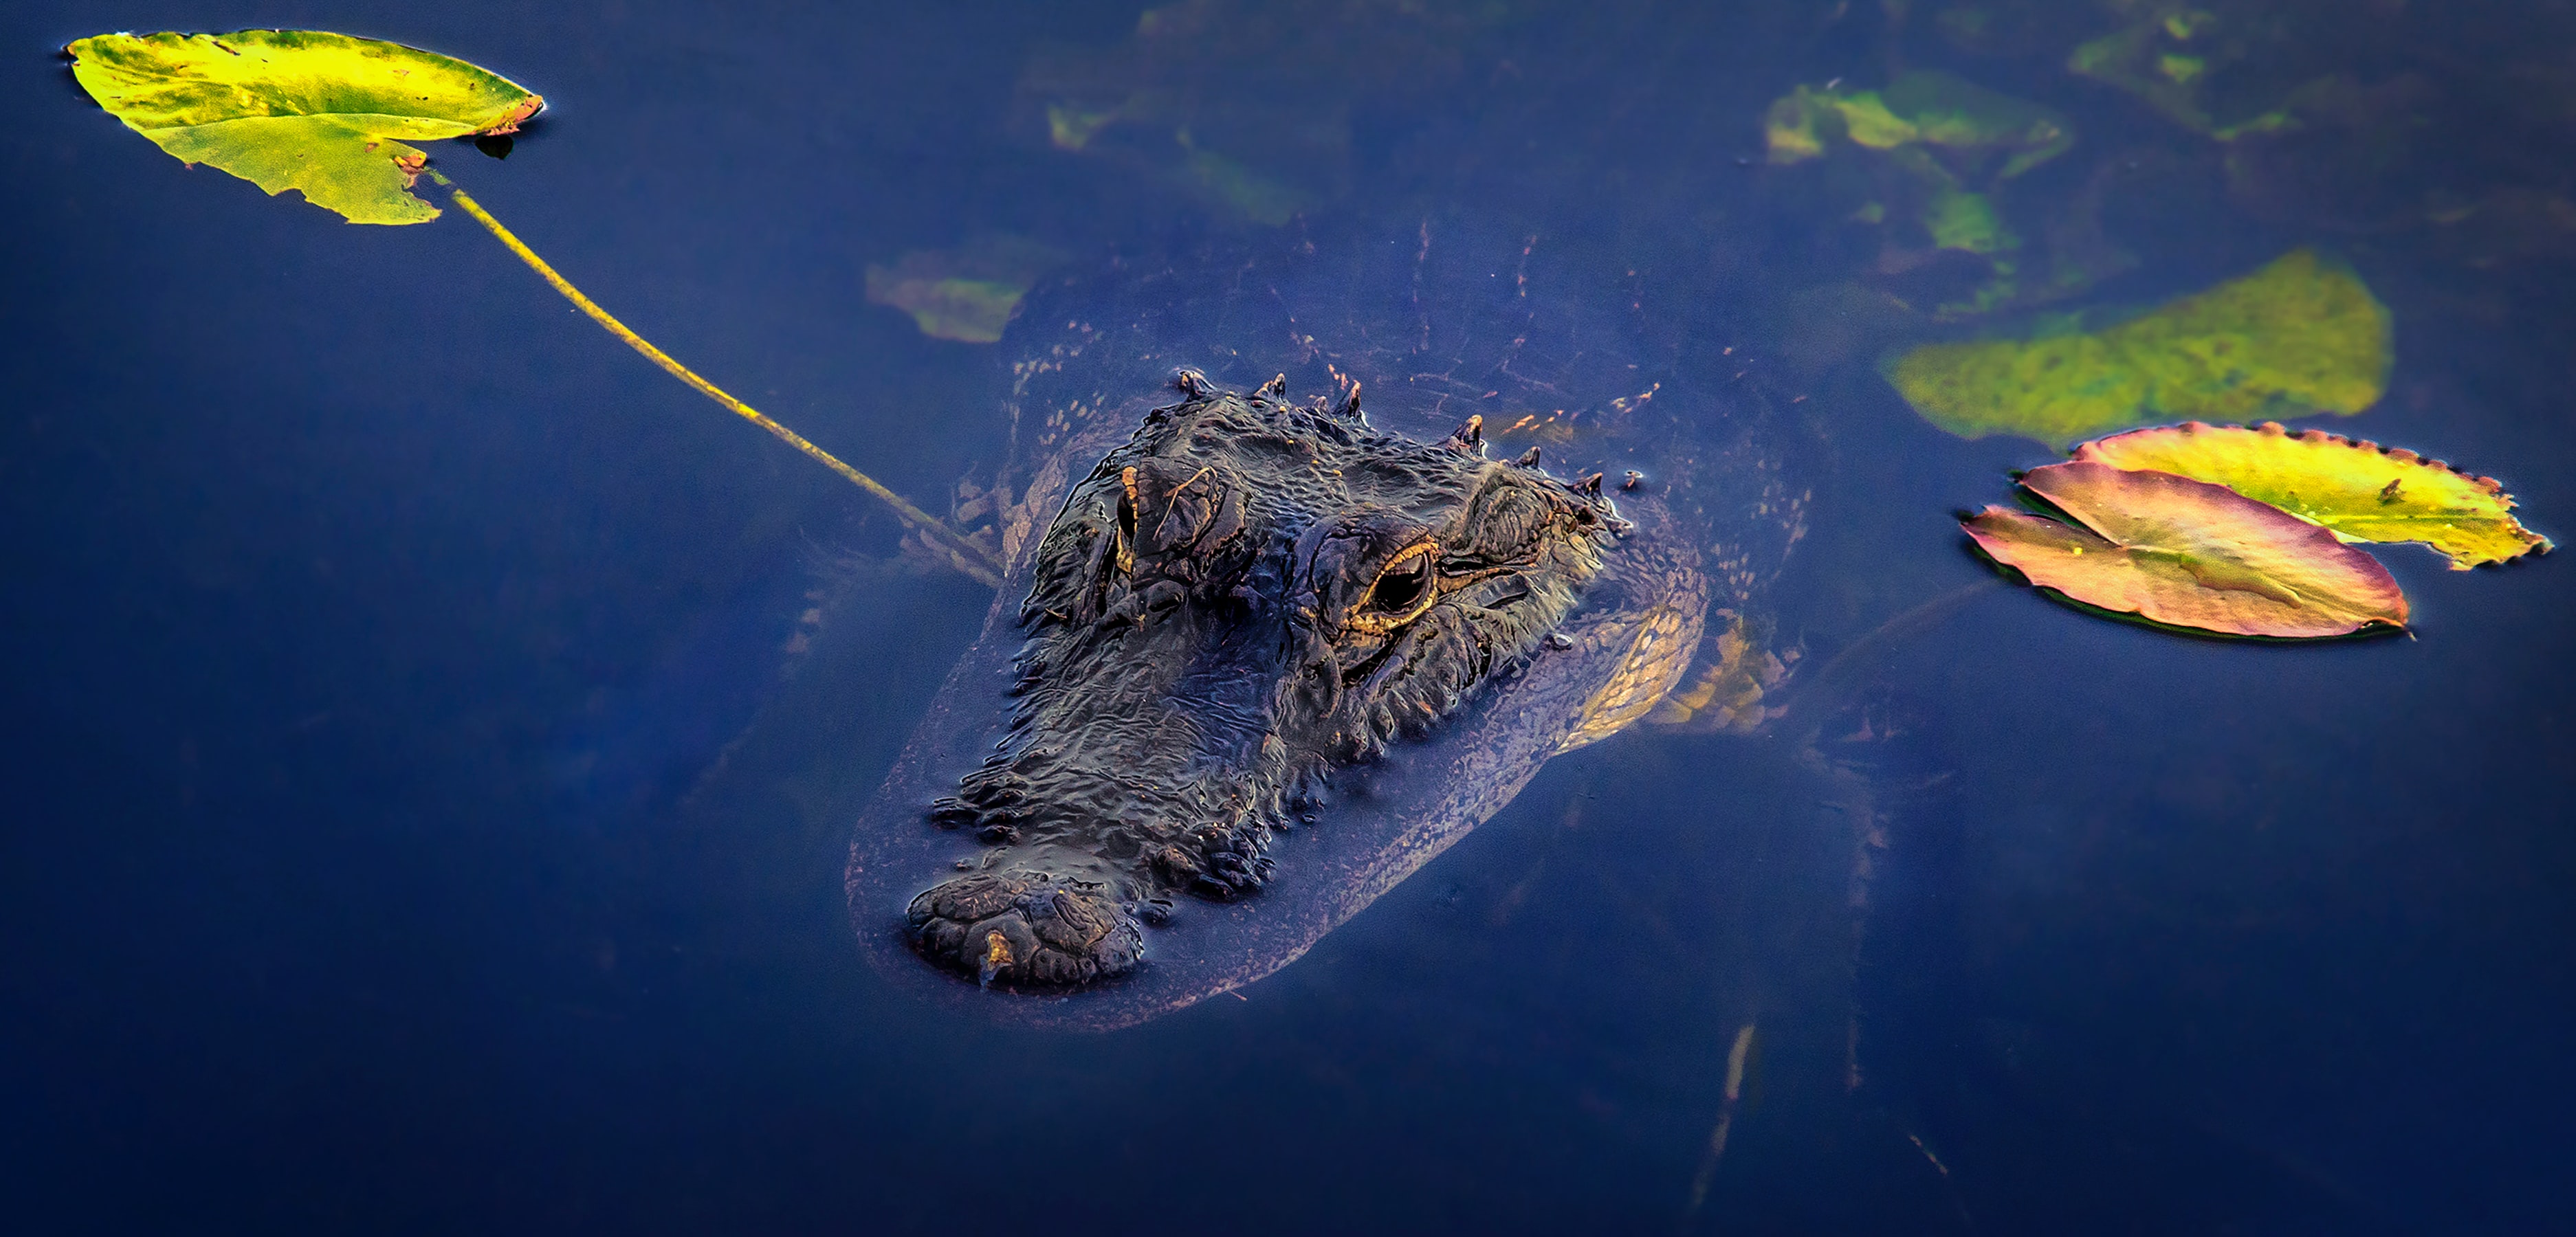 Gator surfaces with beedy eyes. 